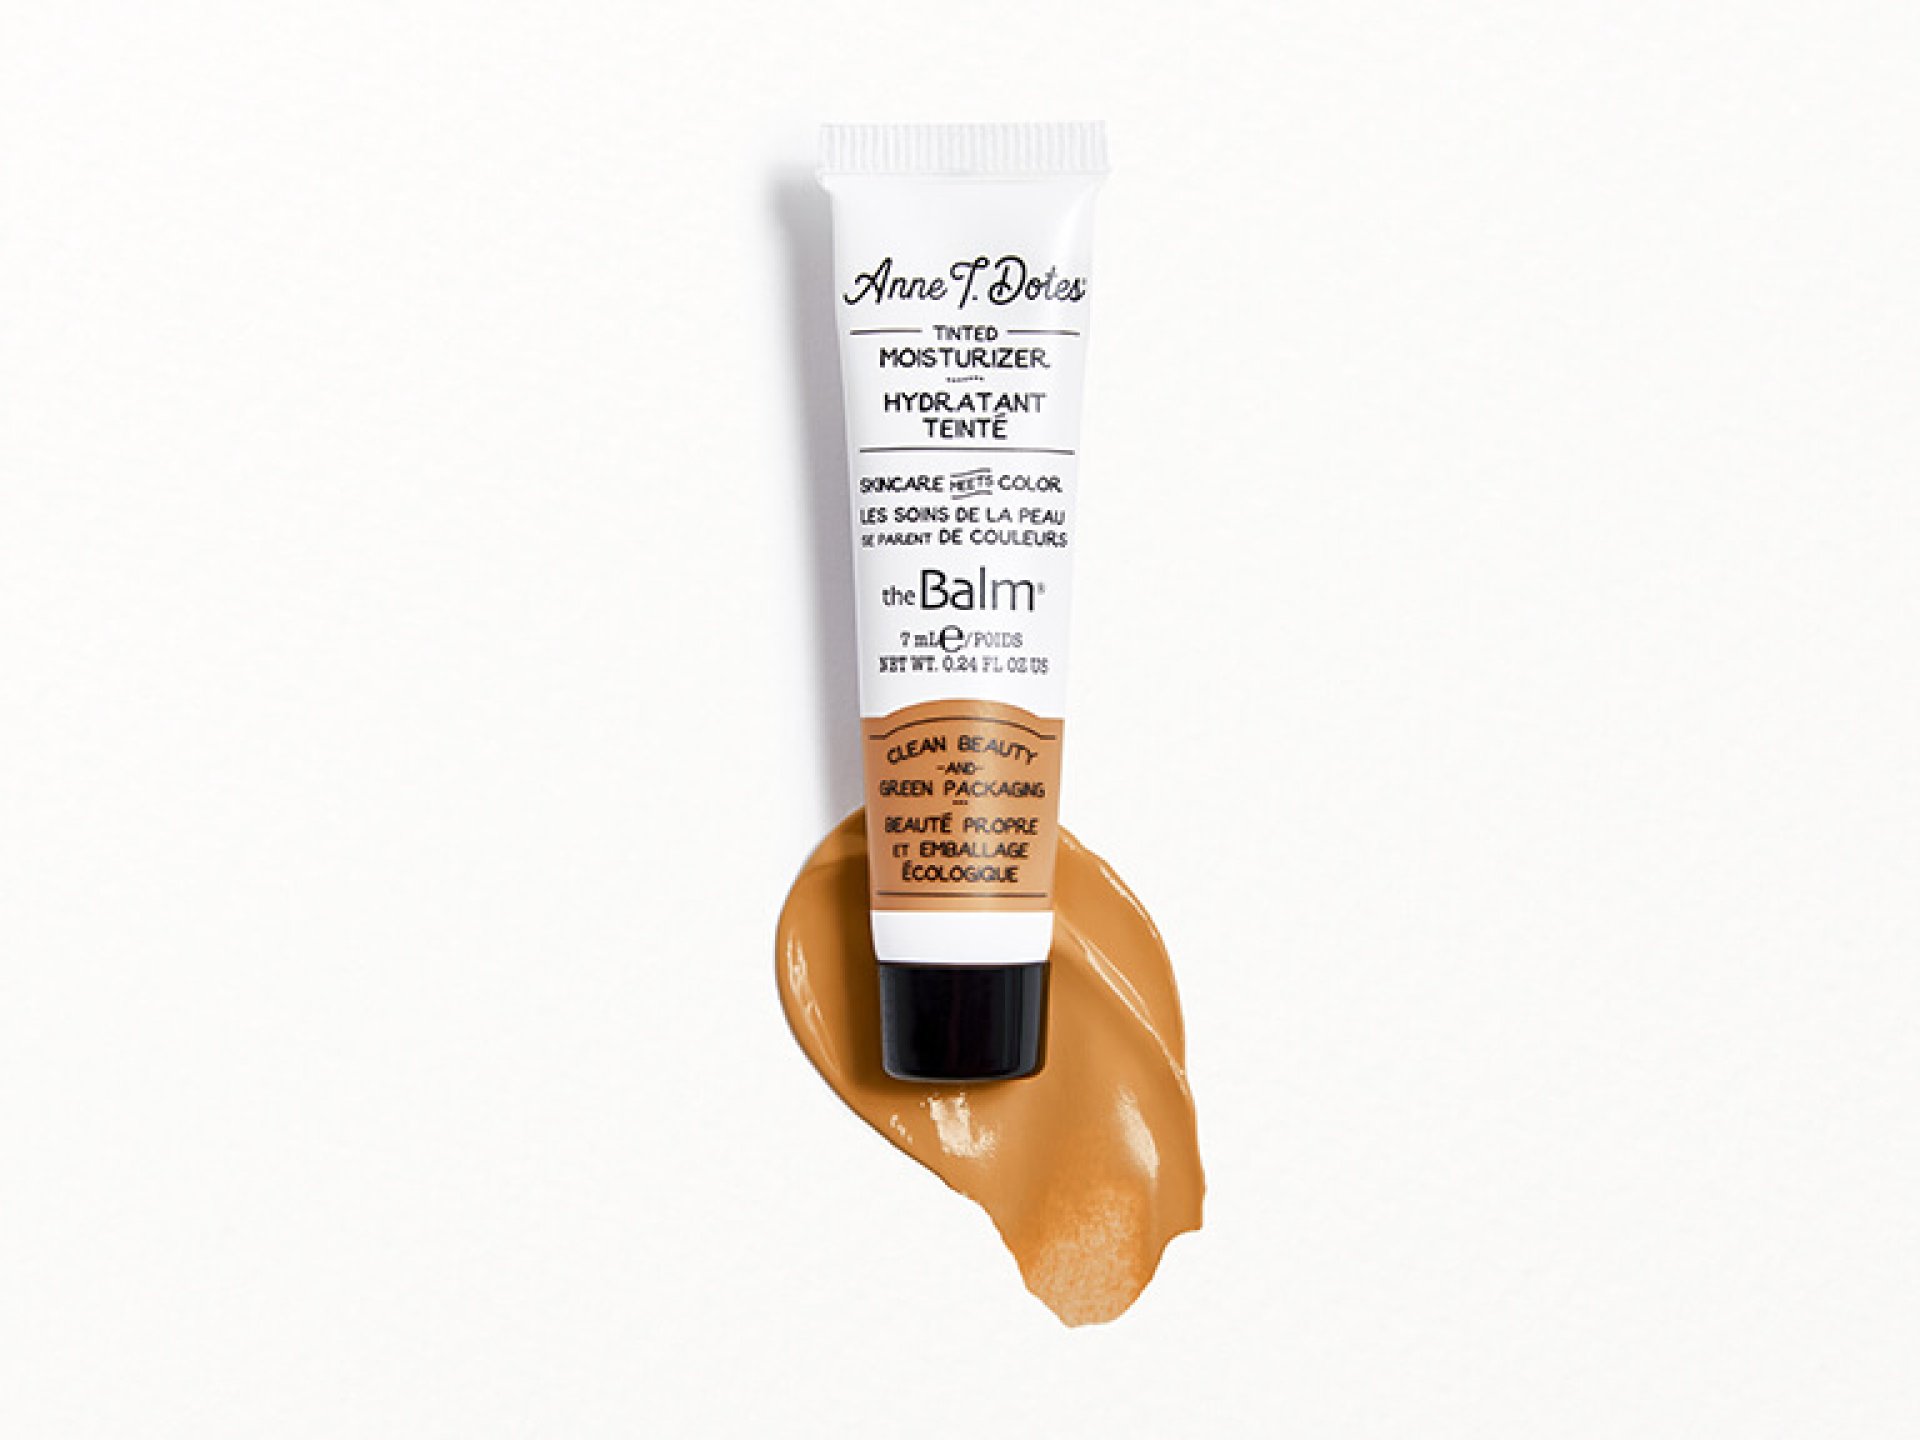 THEBALM COSMETICS Anne T. Dotes Tinted Moisturizer in #34